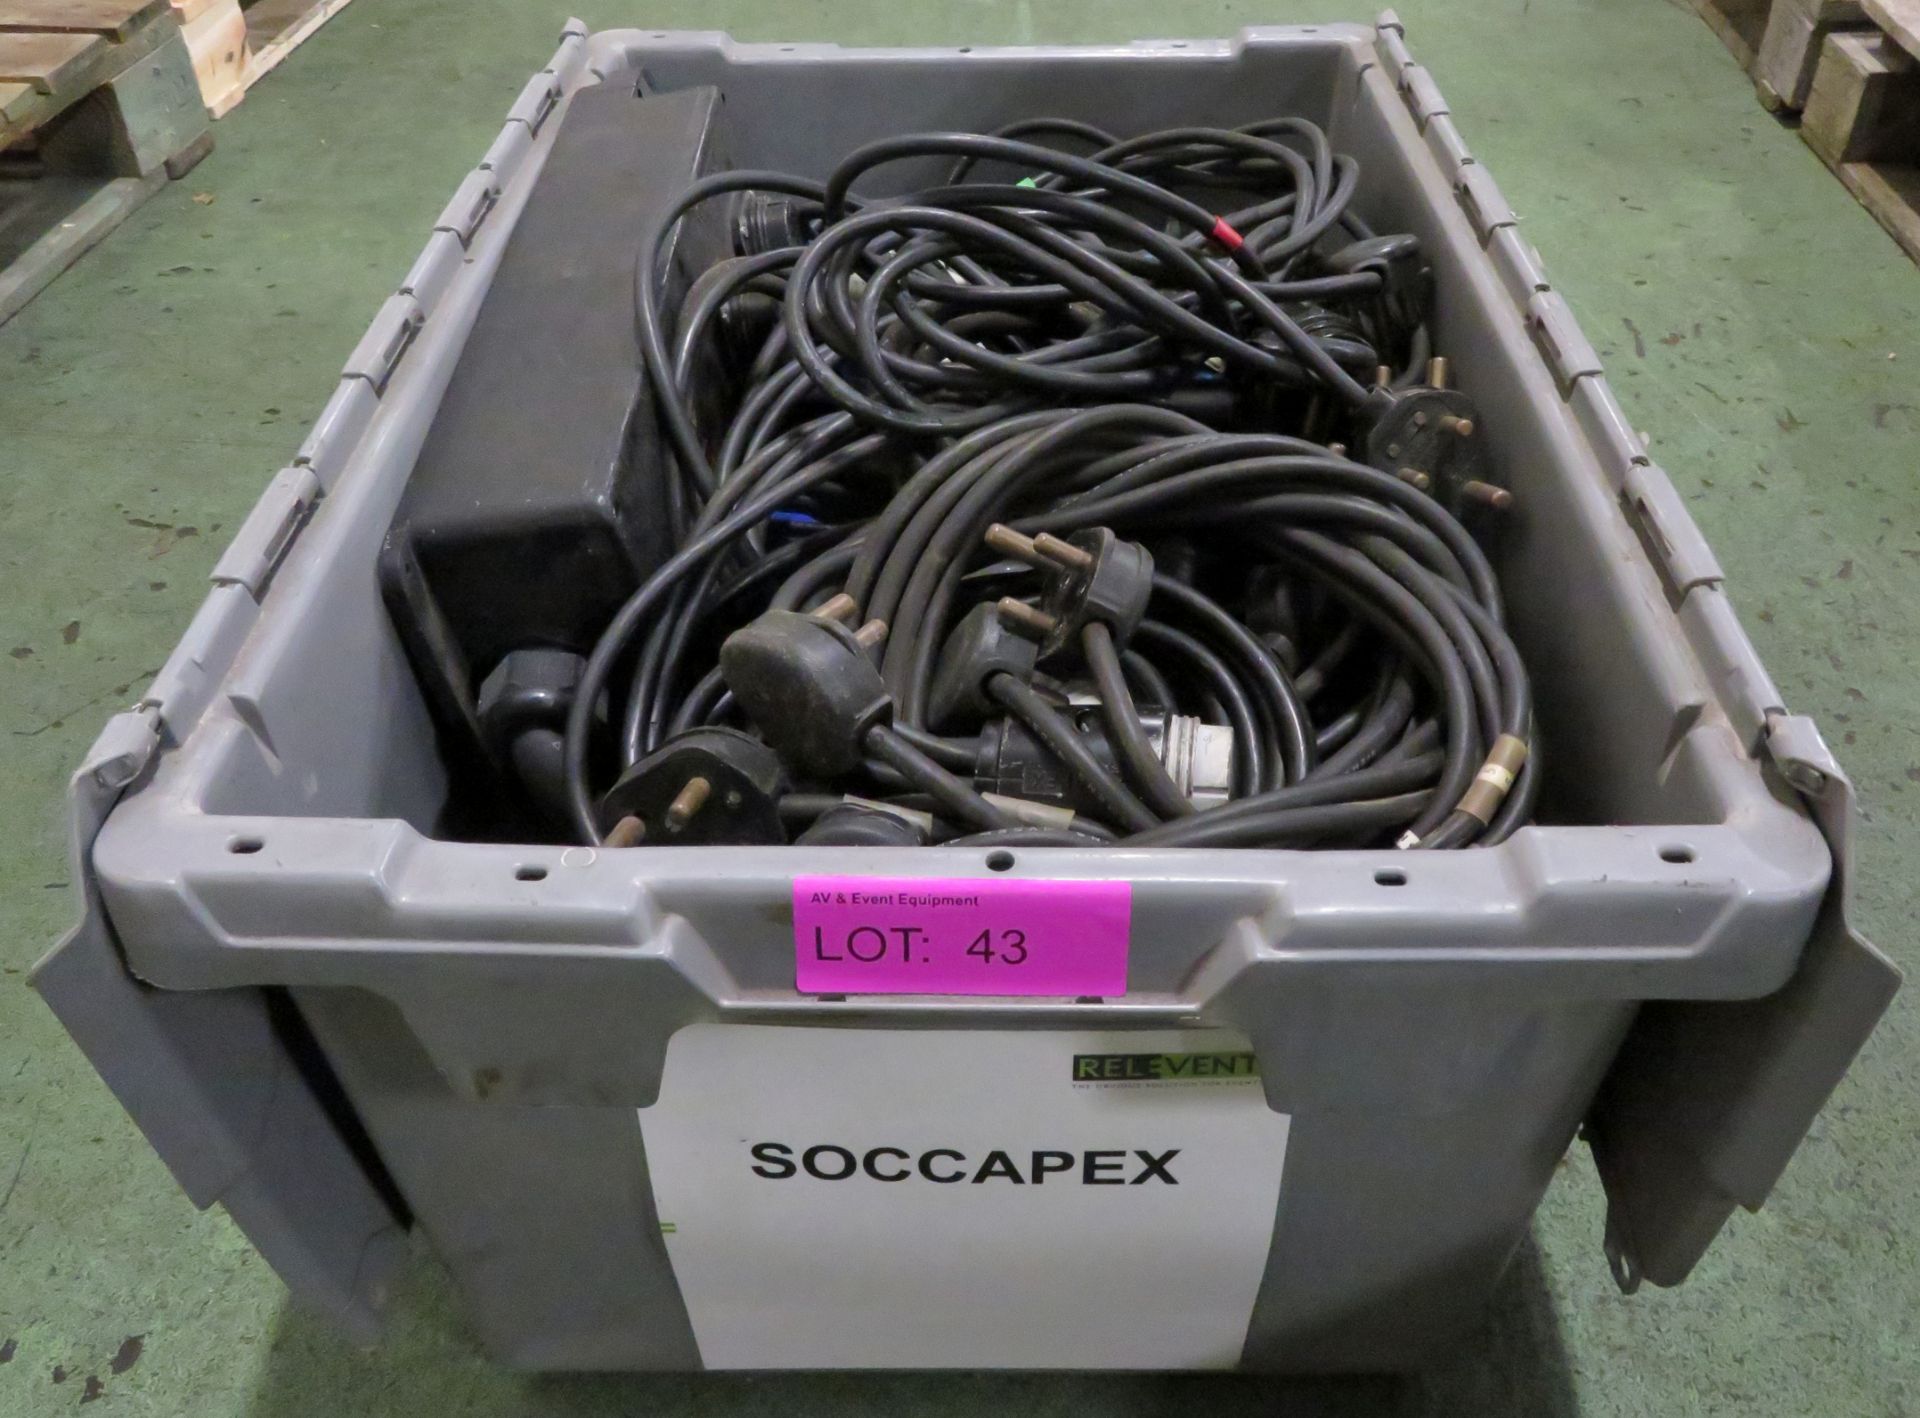 Grey Crate Containing Socapex Breakouts.